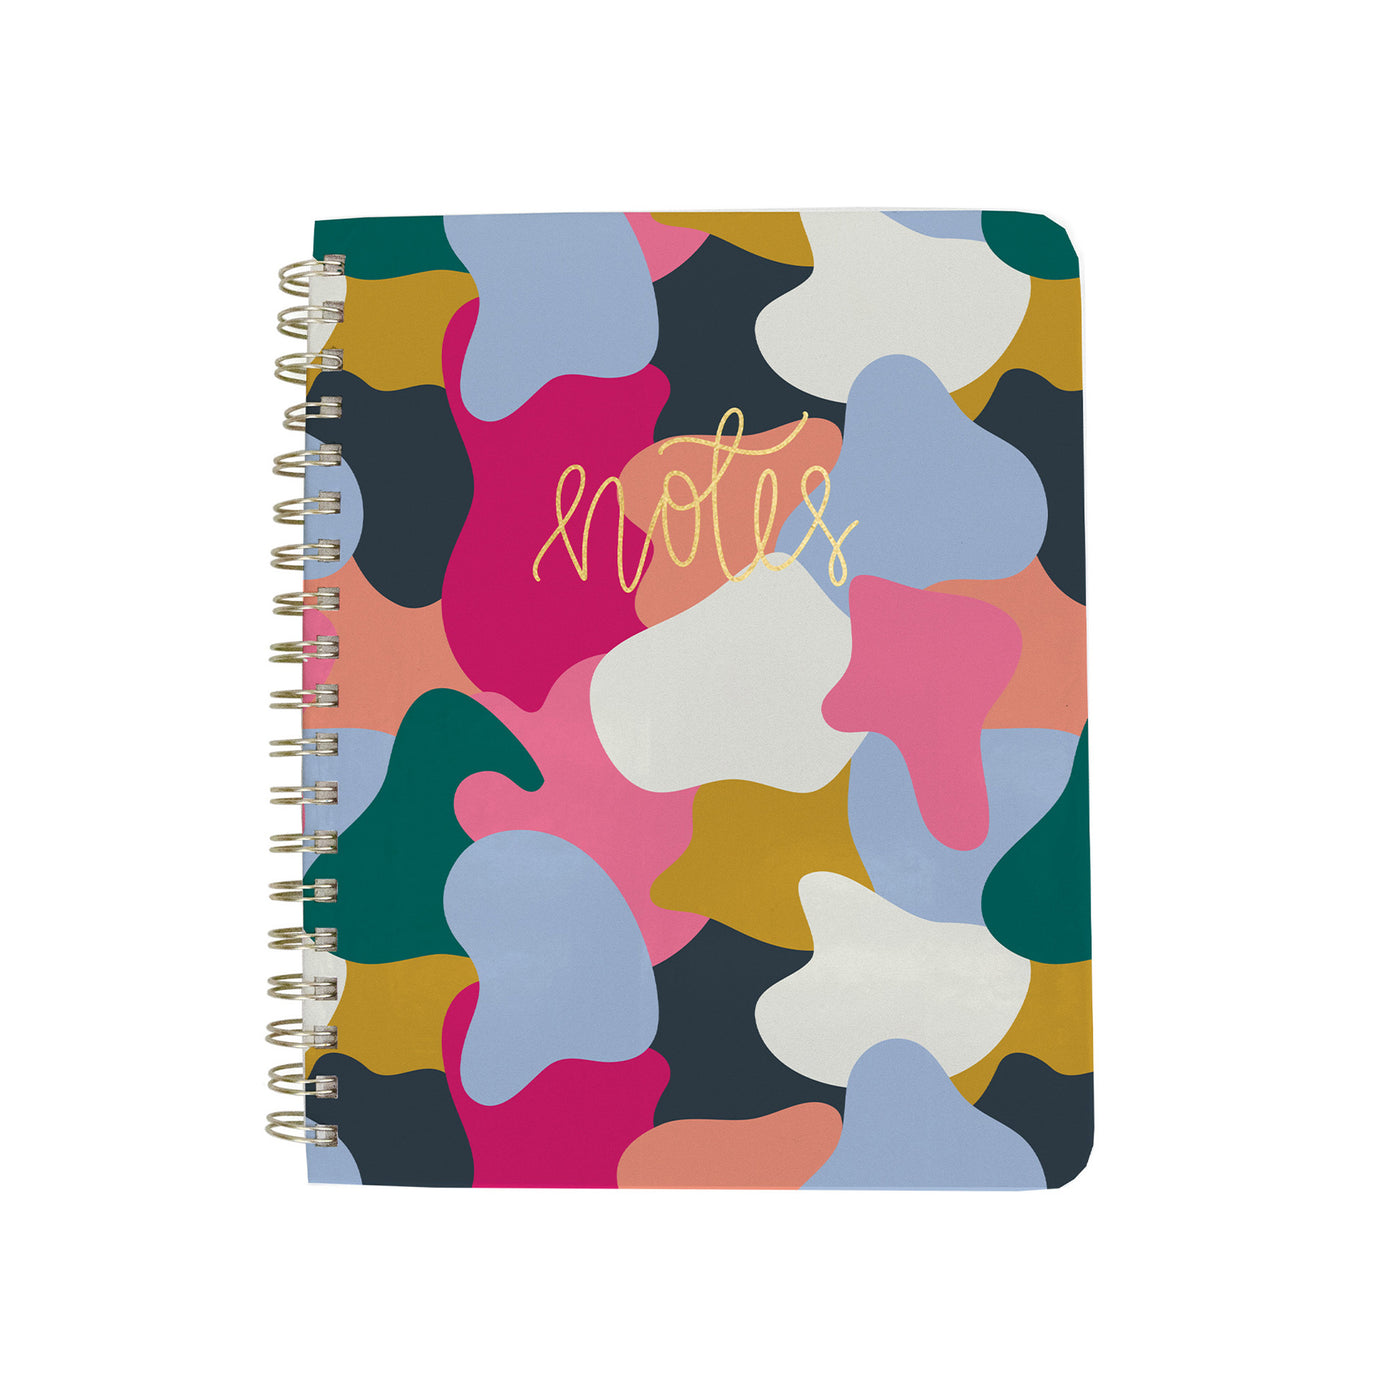 Fade Away Notes | Spiral Notebook - Mary Square, LLC